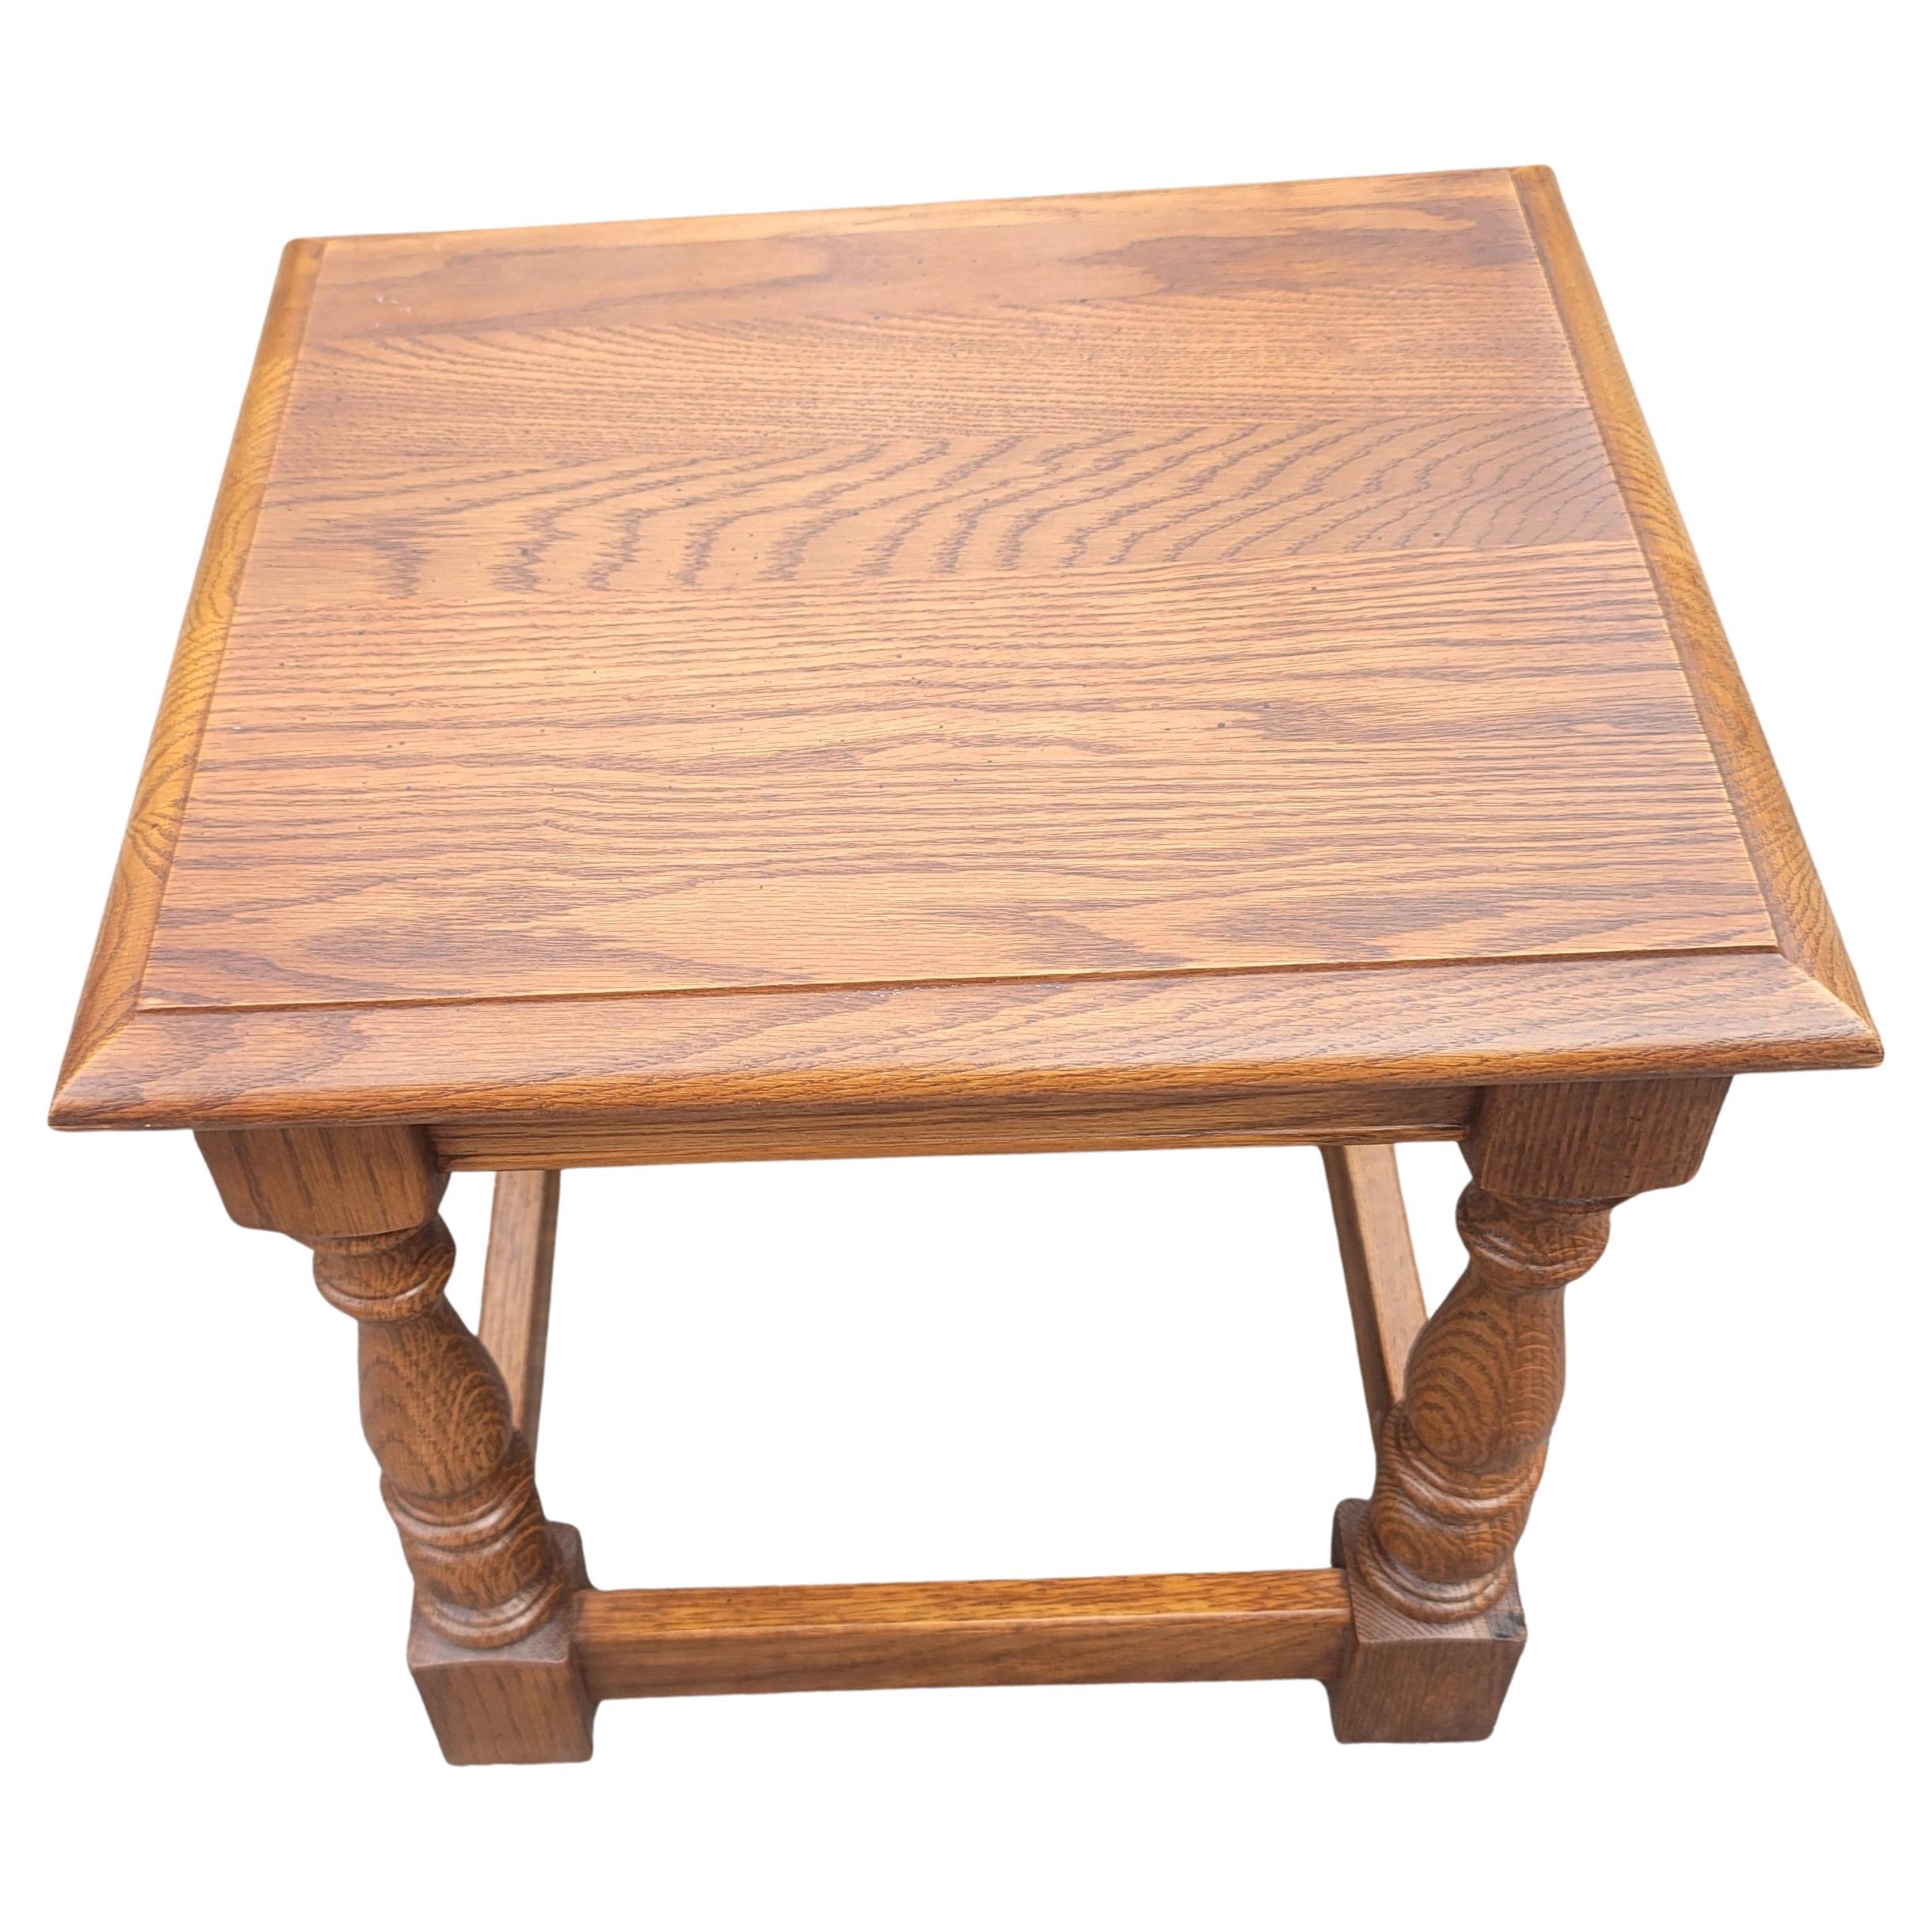 20th Century Country View Amish Handcrafted Mission Oak Low Stools For Sale